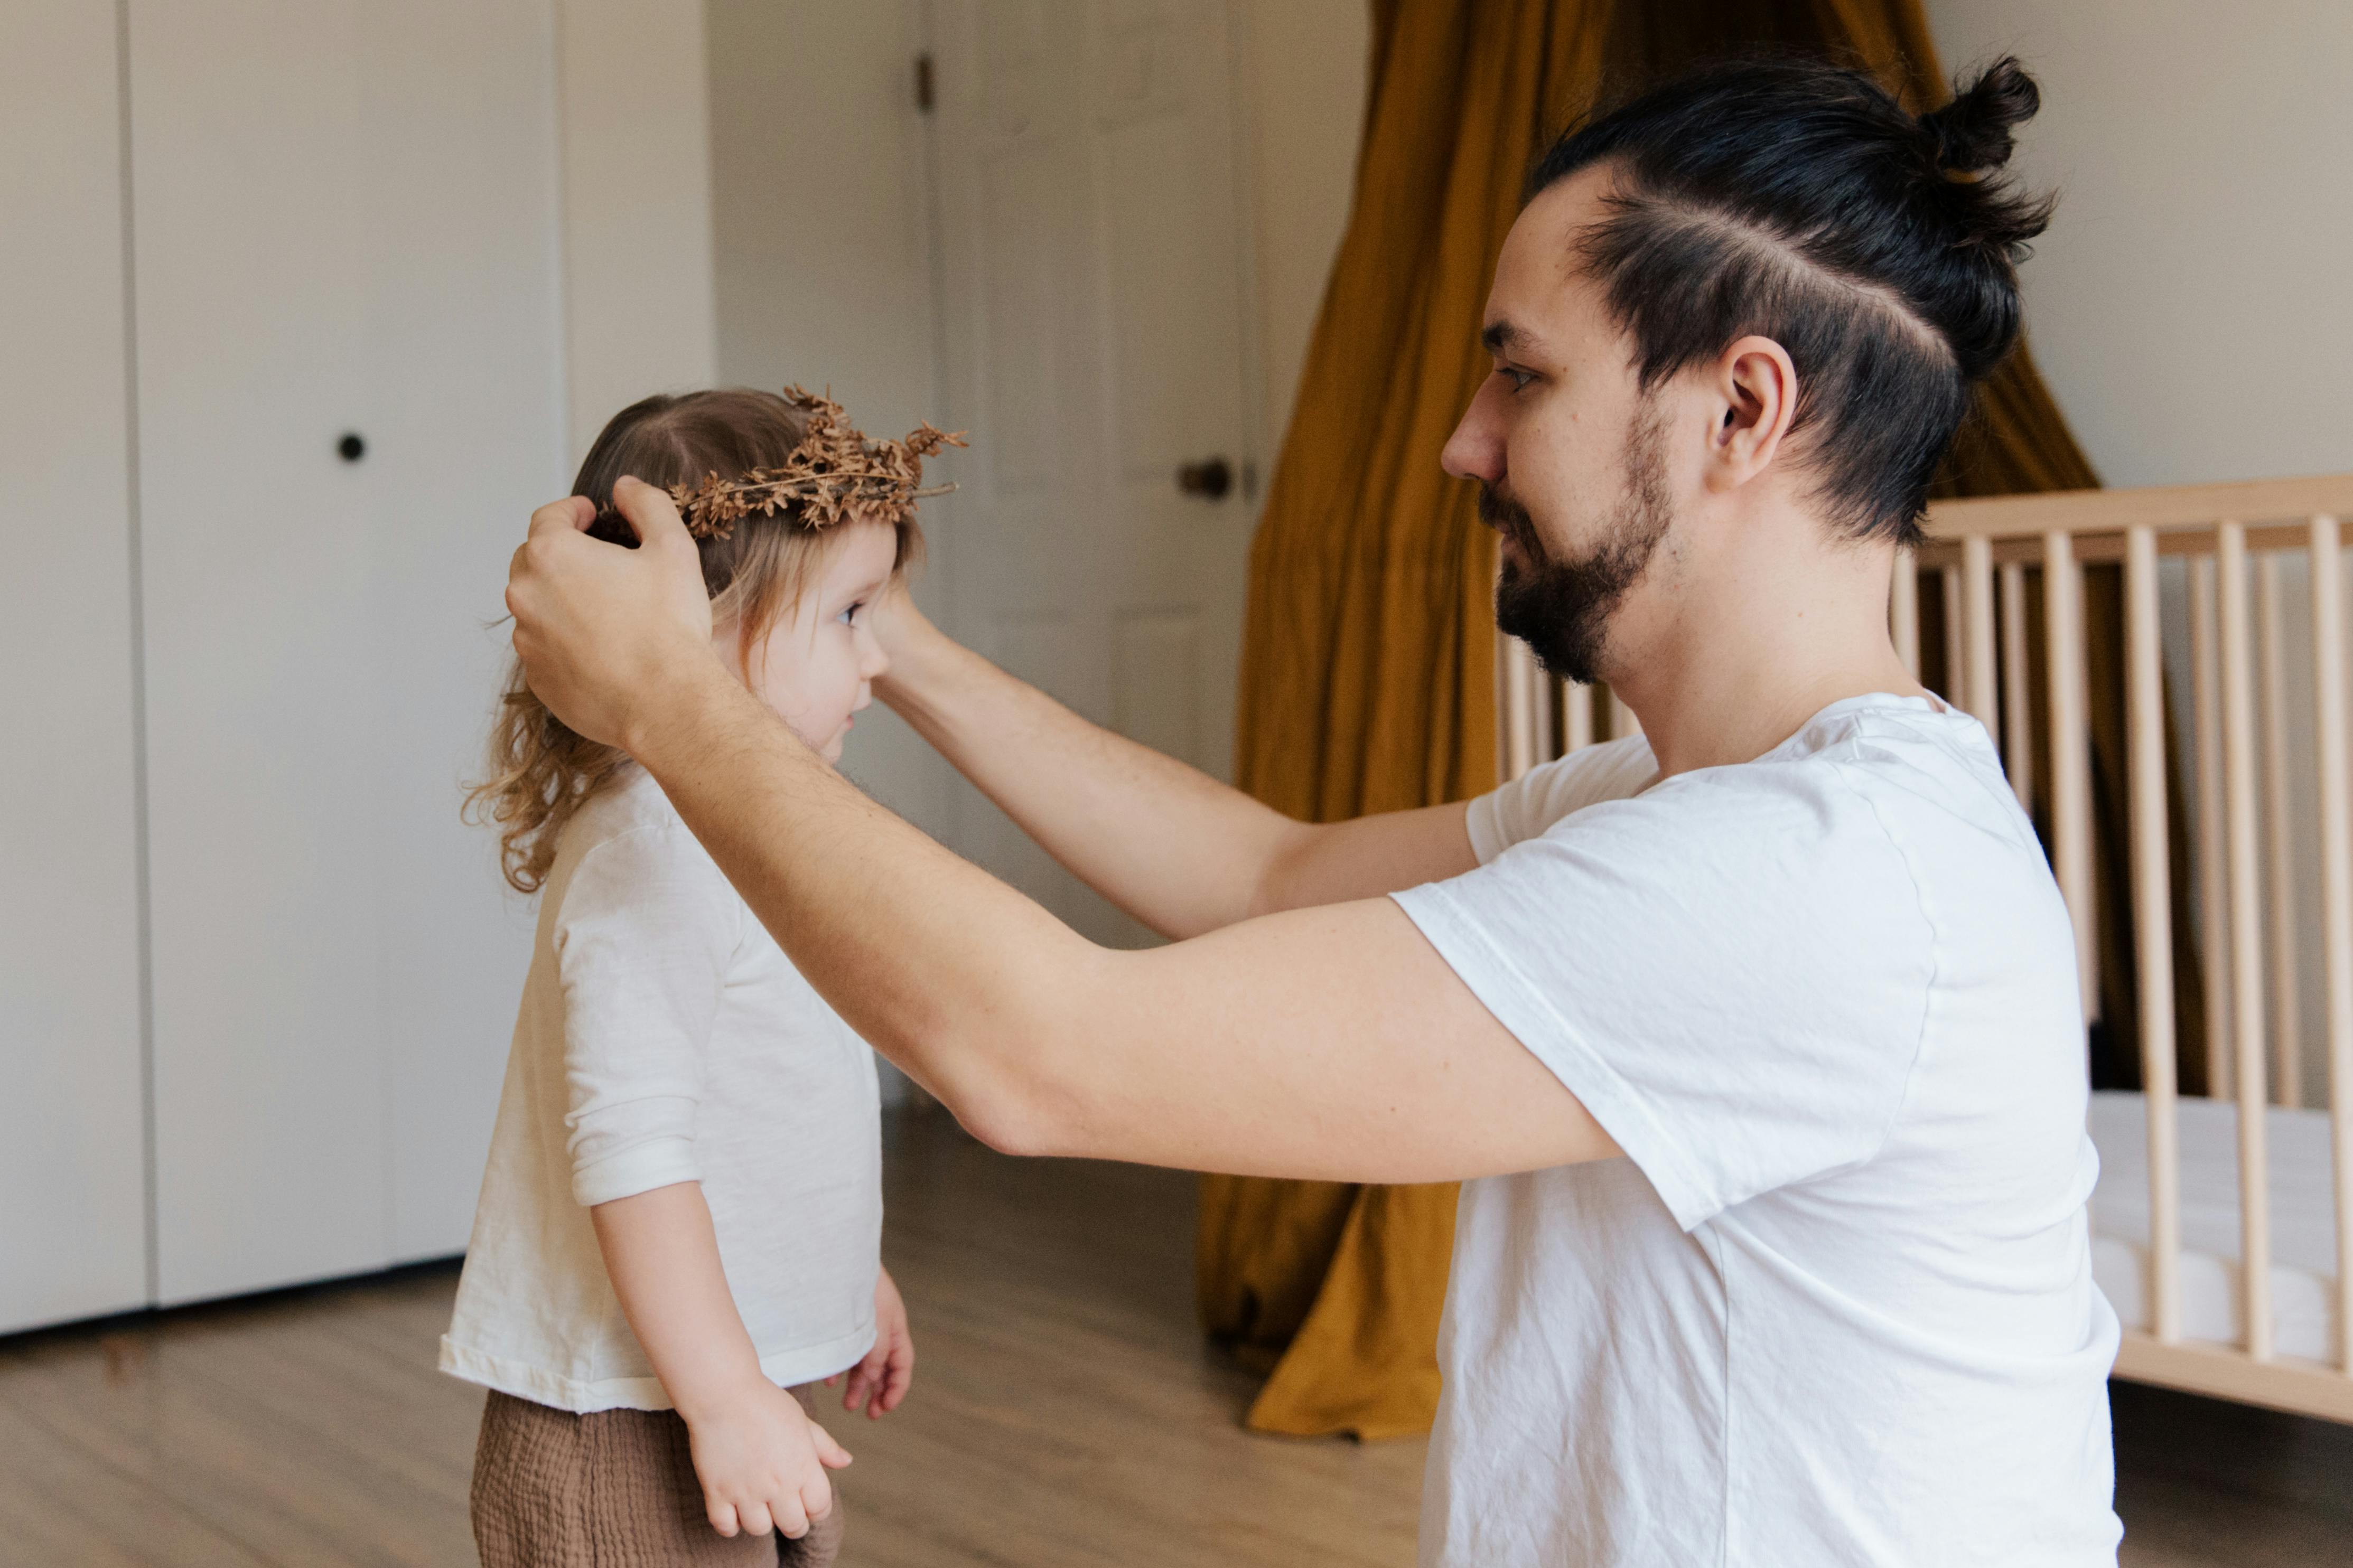 A father adorning his daughter's hair | Source: Pexels